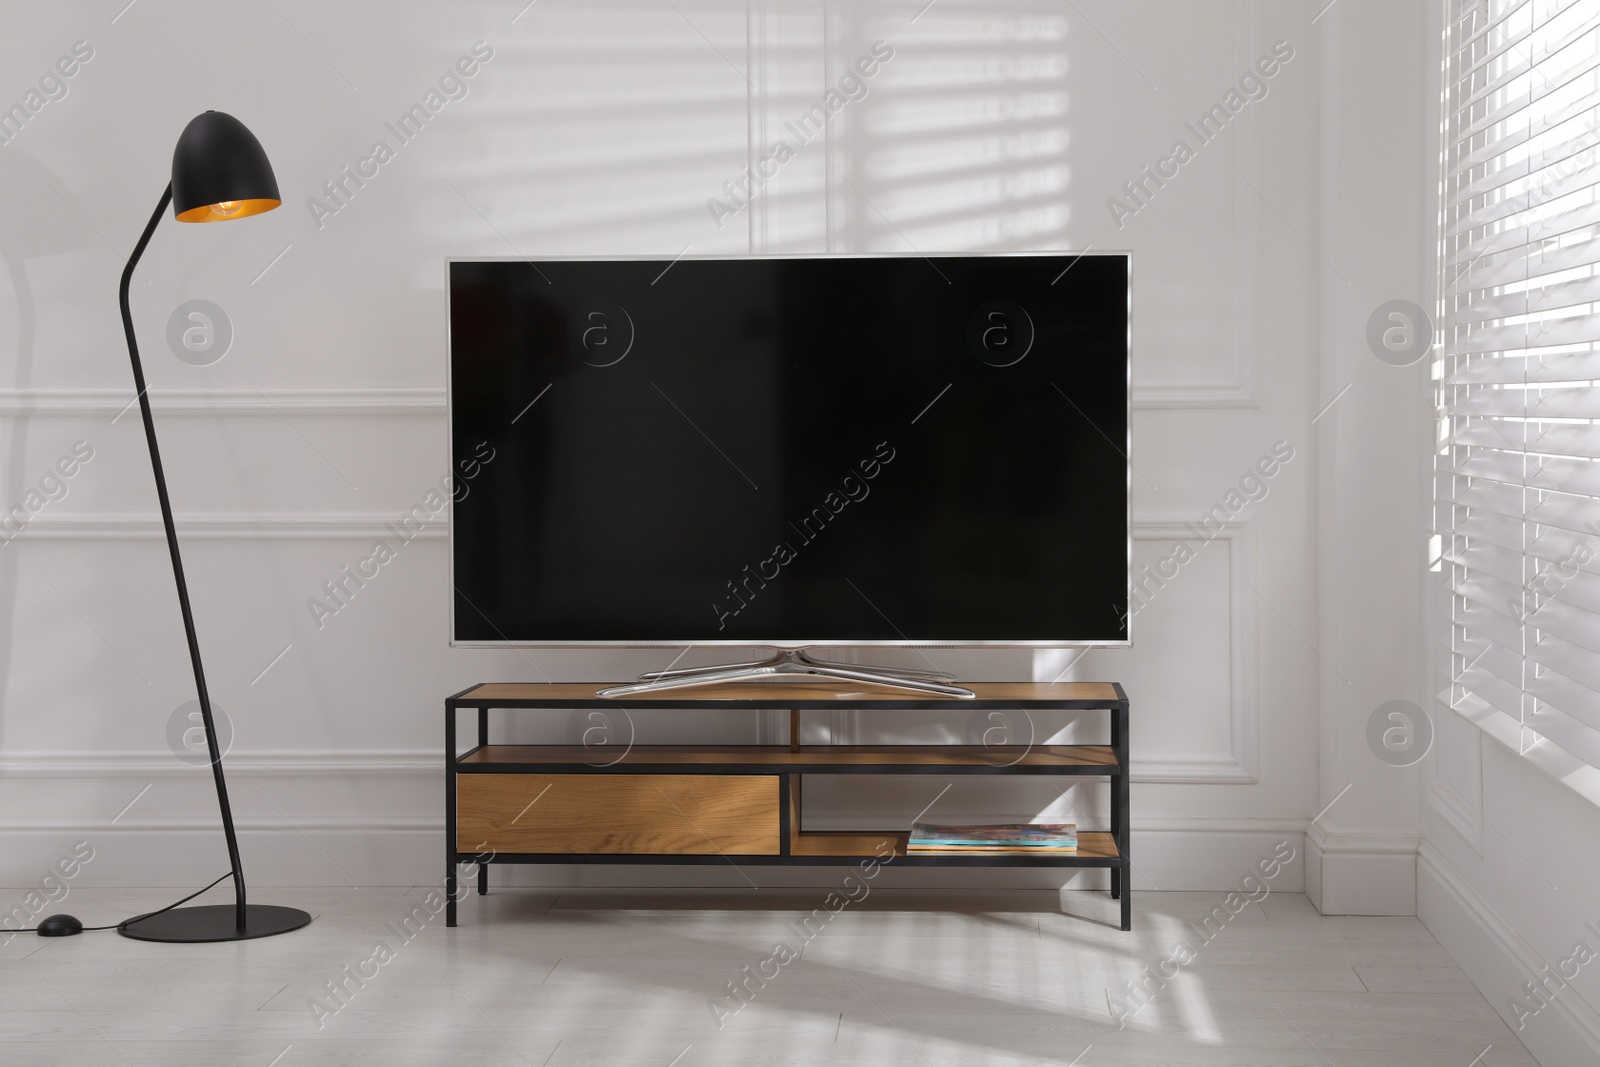 Photo of Modern TV on stand near white wall indoors. Interior design